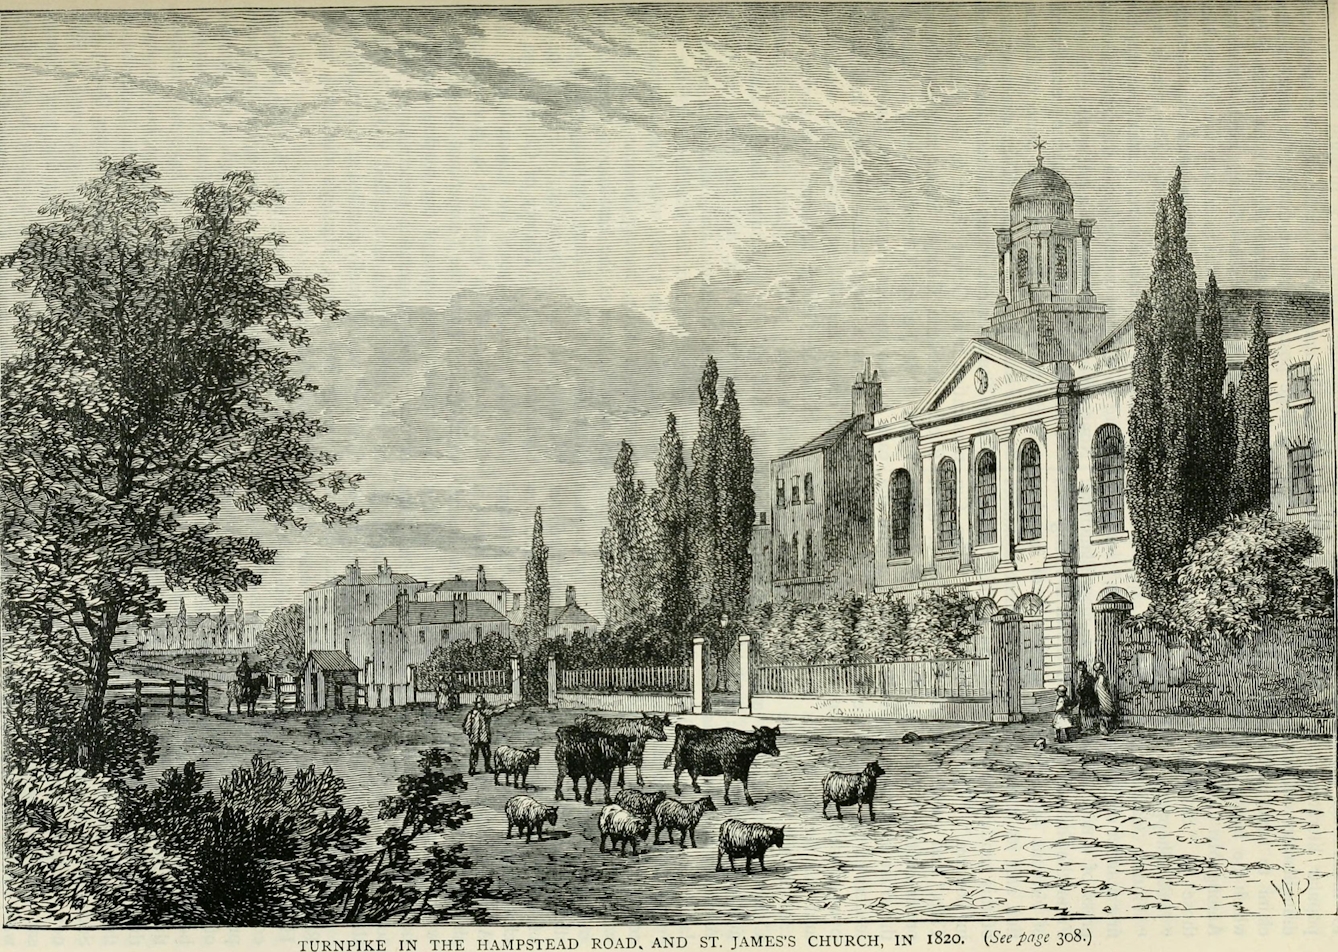 Drawing of St James's Church, with three people standing outside its gate.  In the road in front of the church another person is directing a small herd of cattle.  In the background are other buildings and a person on horseback.  The church is flanked by tall trees on either side.  Accompanying text reads 'Turnpike in the Hampstead Road, and St James's Church, in 1820.'